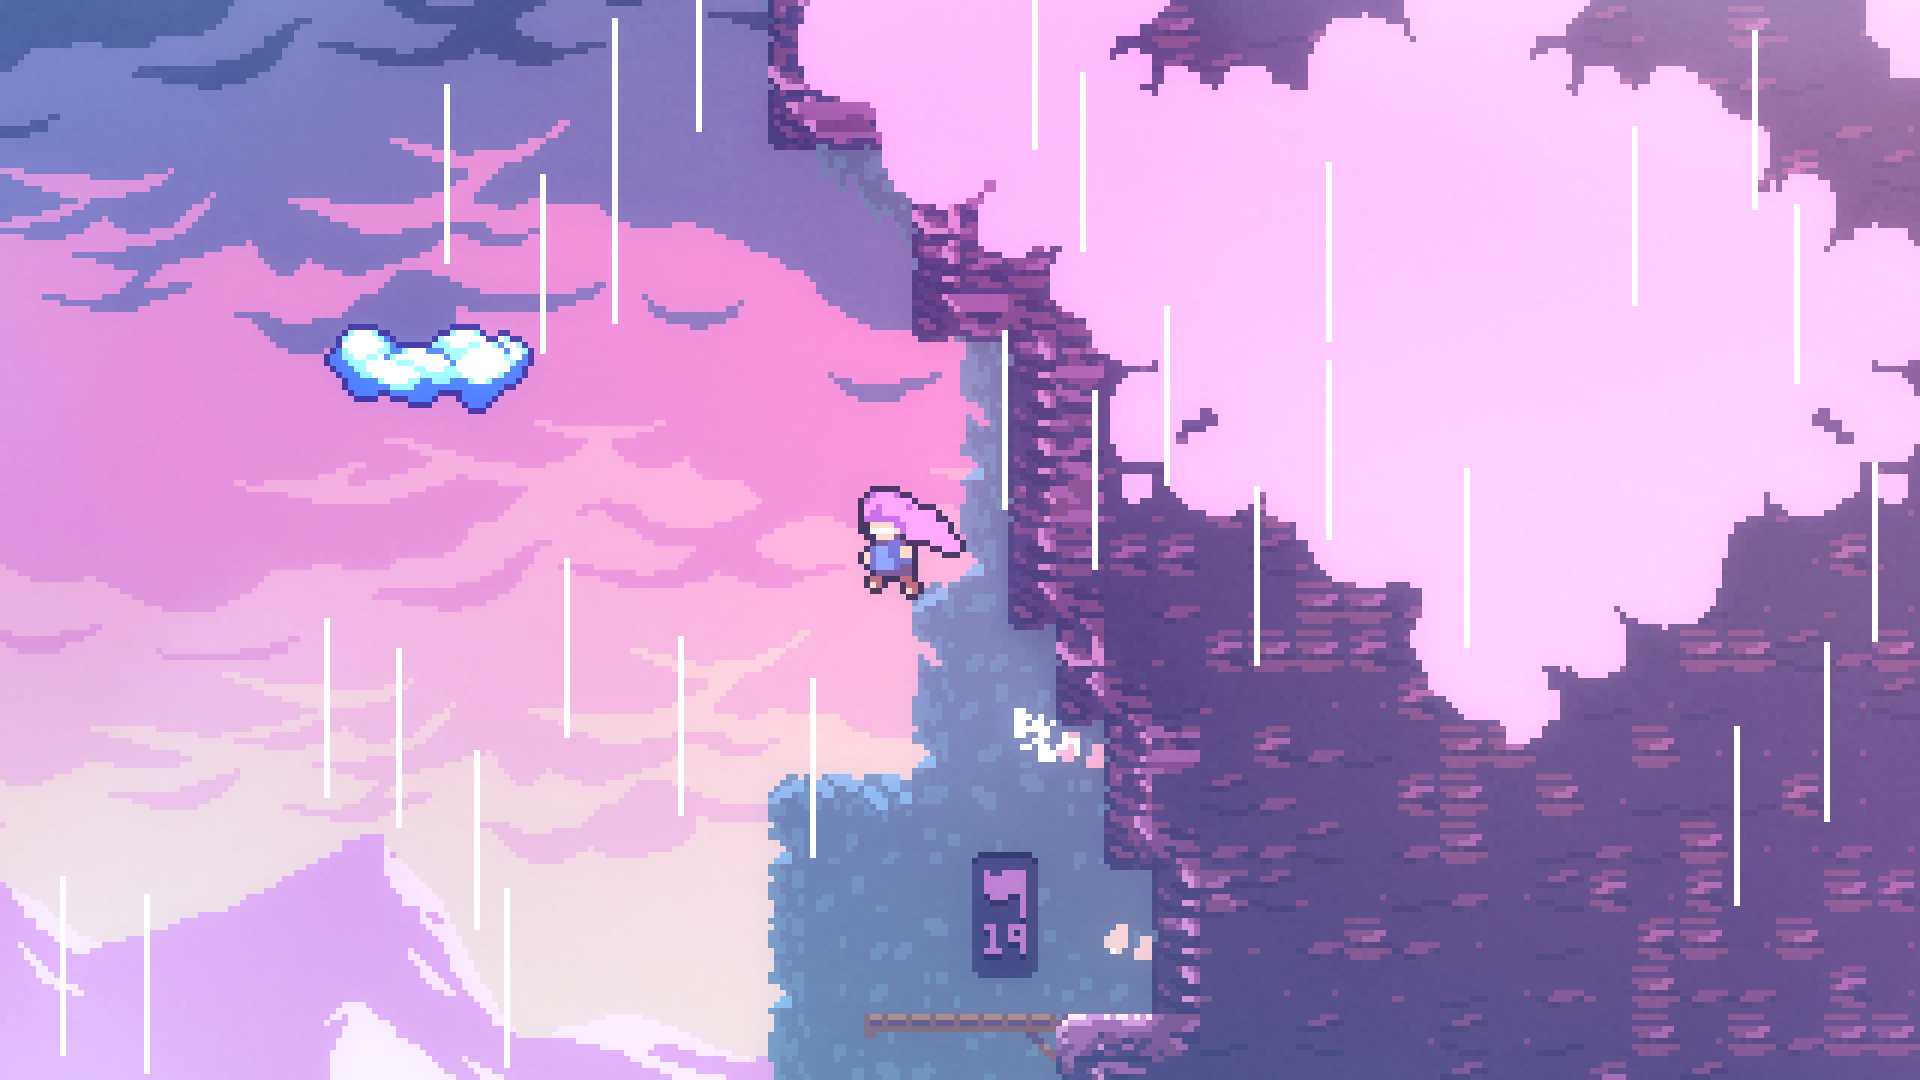 Celeste’s Assist Mode Brings Welcome Accessibility Options